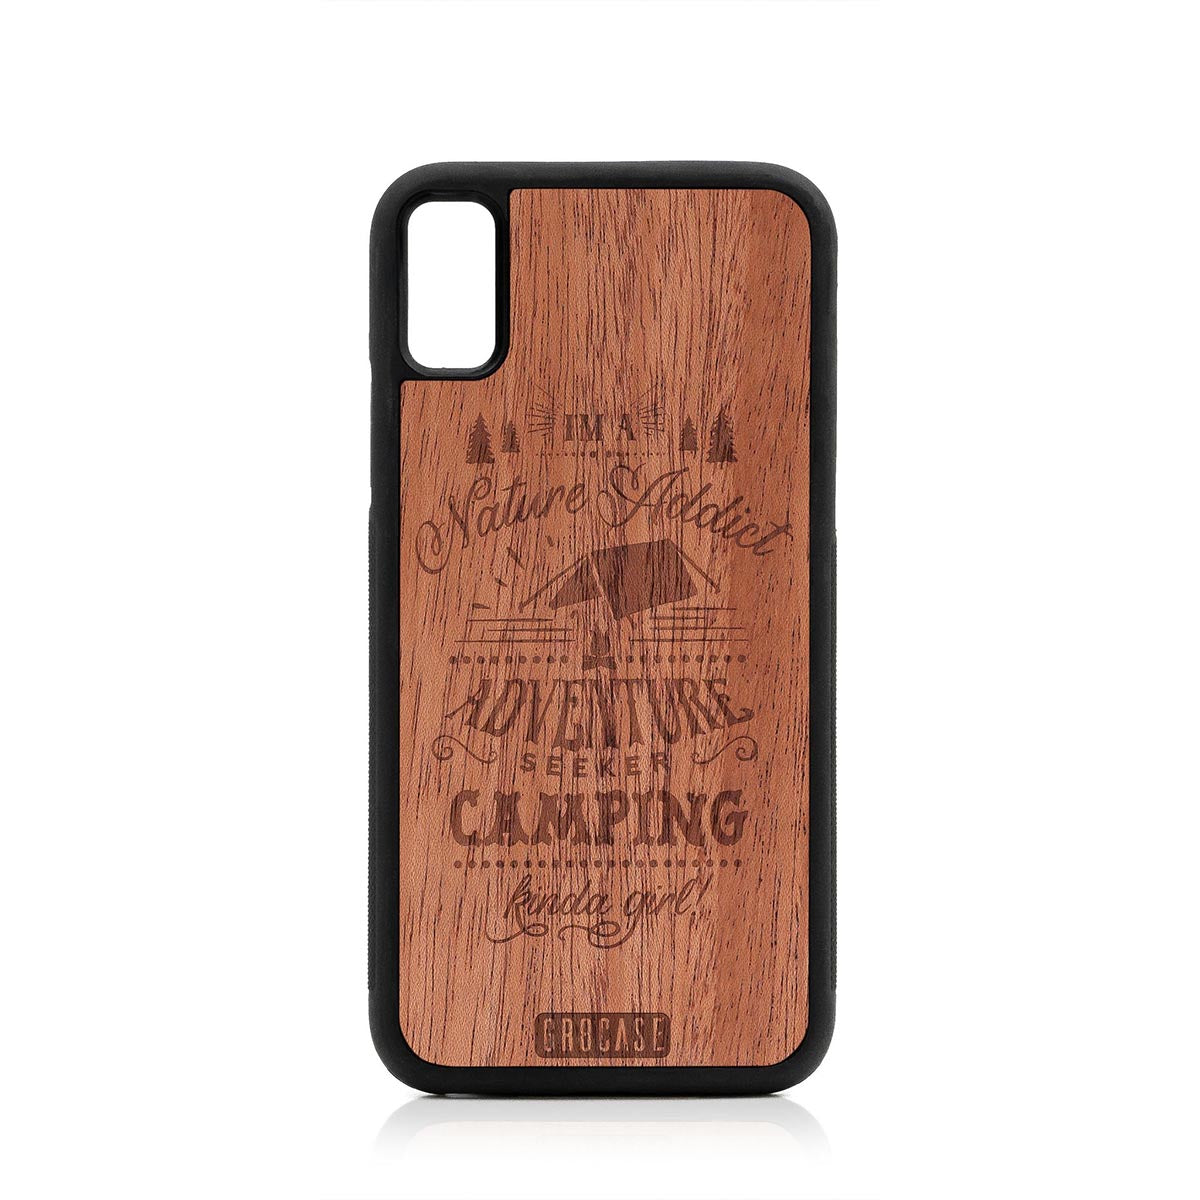 I'm A Nature Addict Adventure Seeker Camping Kinda Girl Design Wood Case For iPhone XR by GR8CASE